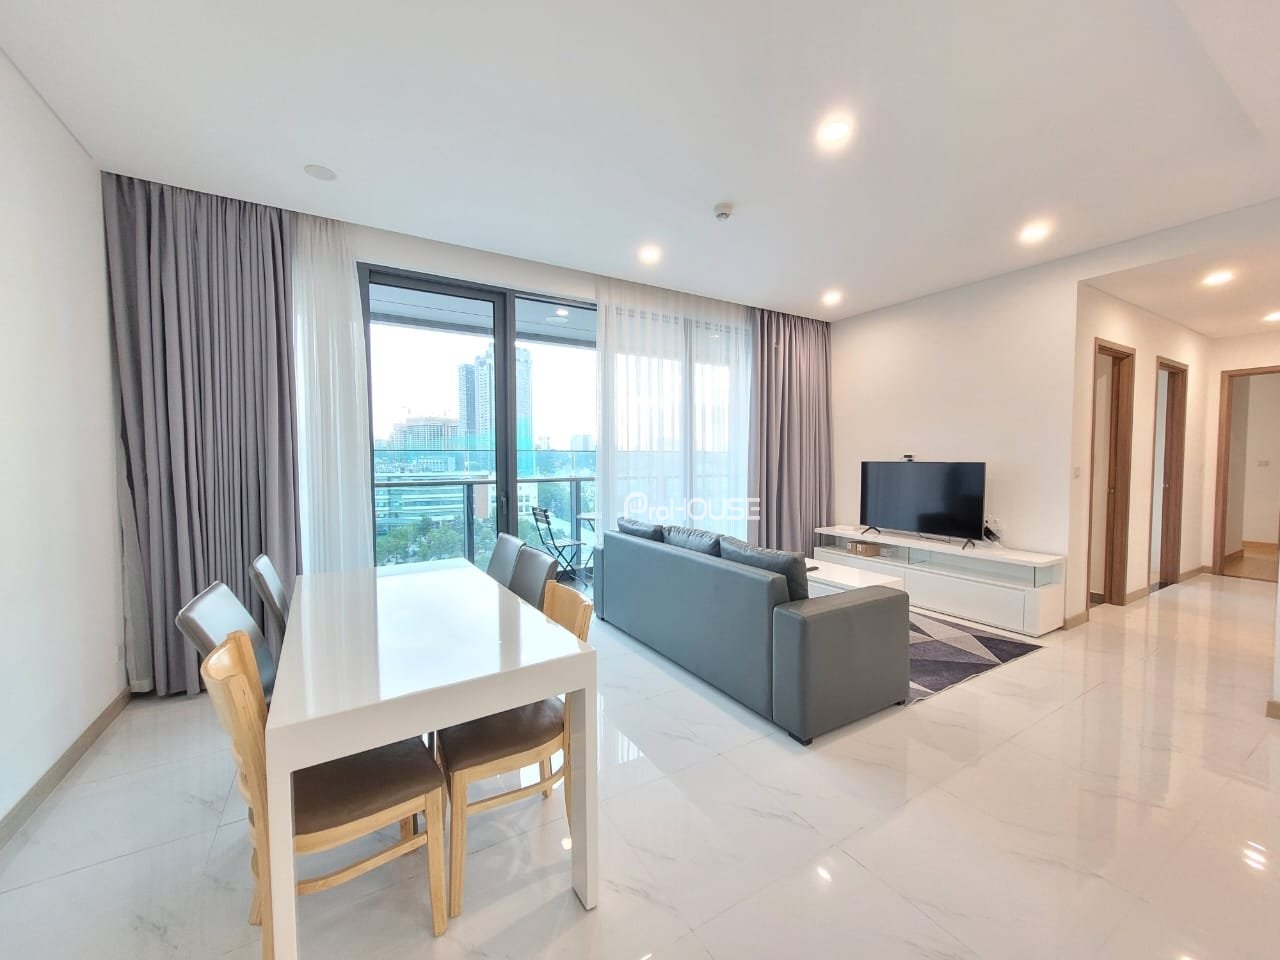 Large 2-bedroom apartment for rent at Sunwah Pearl with full furniture and nice view